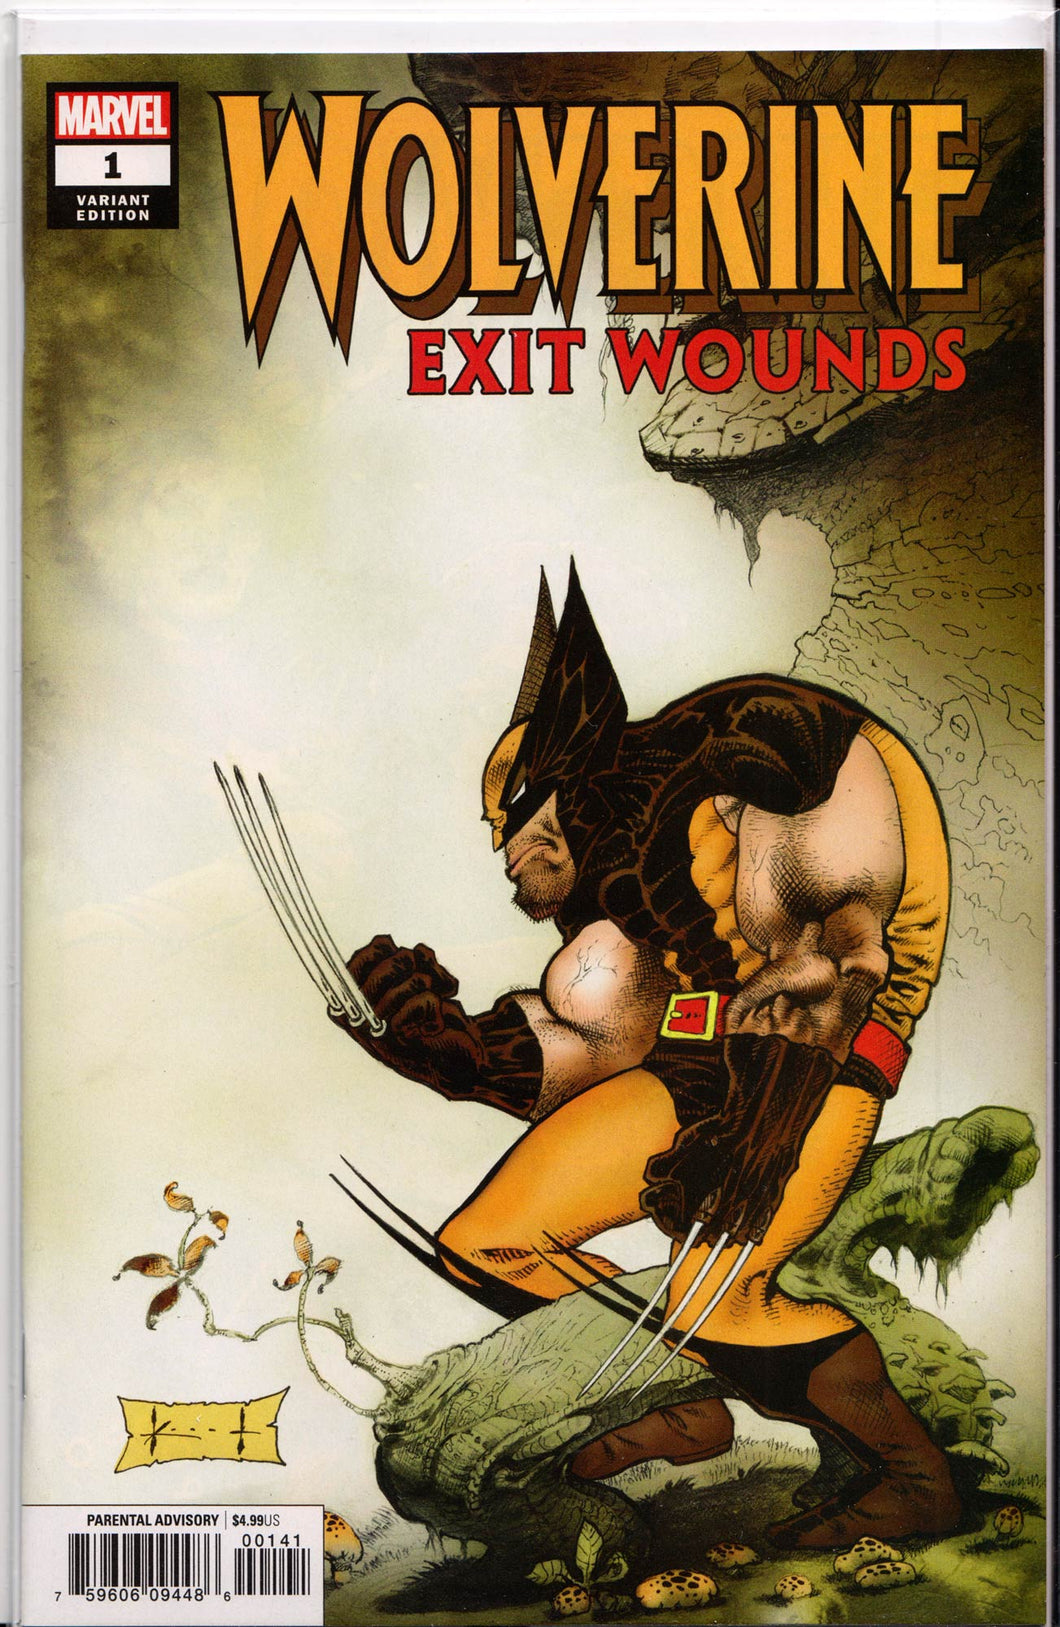 WOLVERINE: EXIT WOUNDS #1 (1ST PRINT) COMIC BOOK ~ Sam Keith ~ Marvel Comics